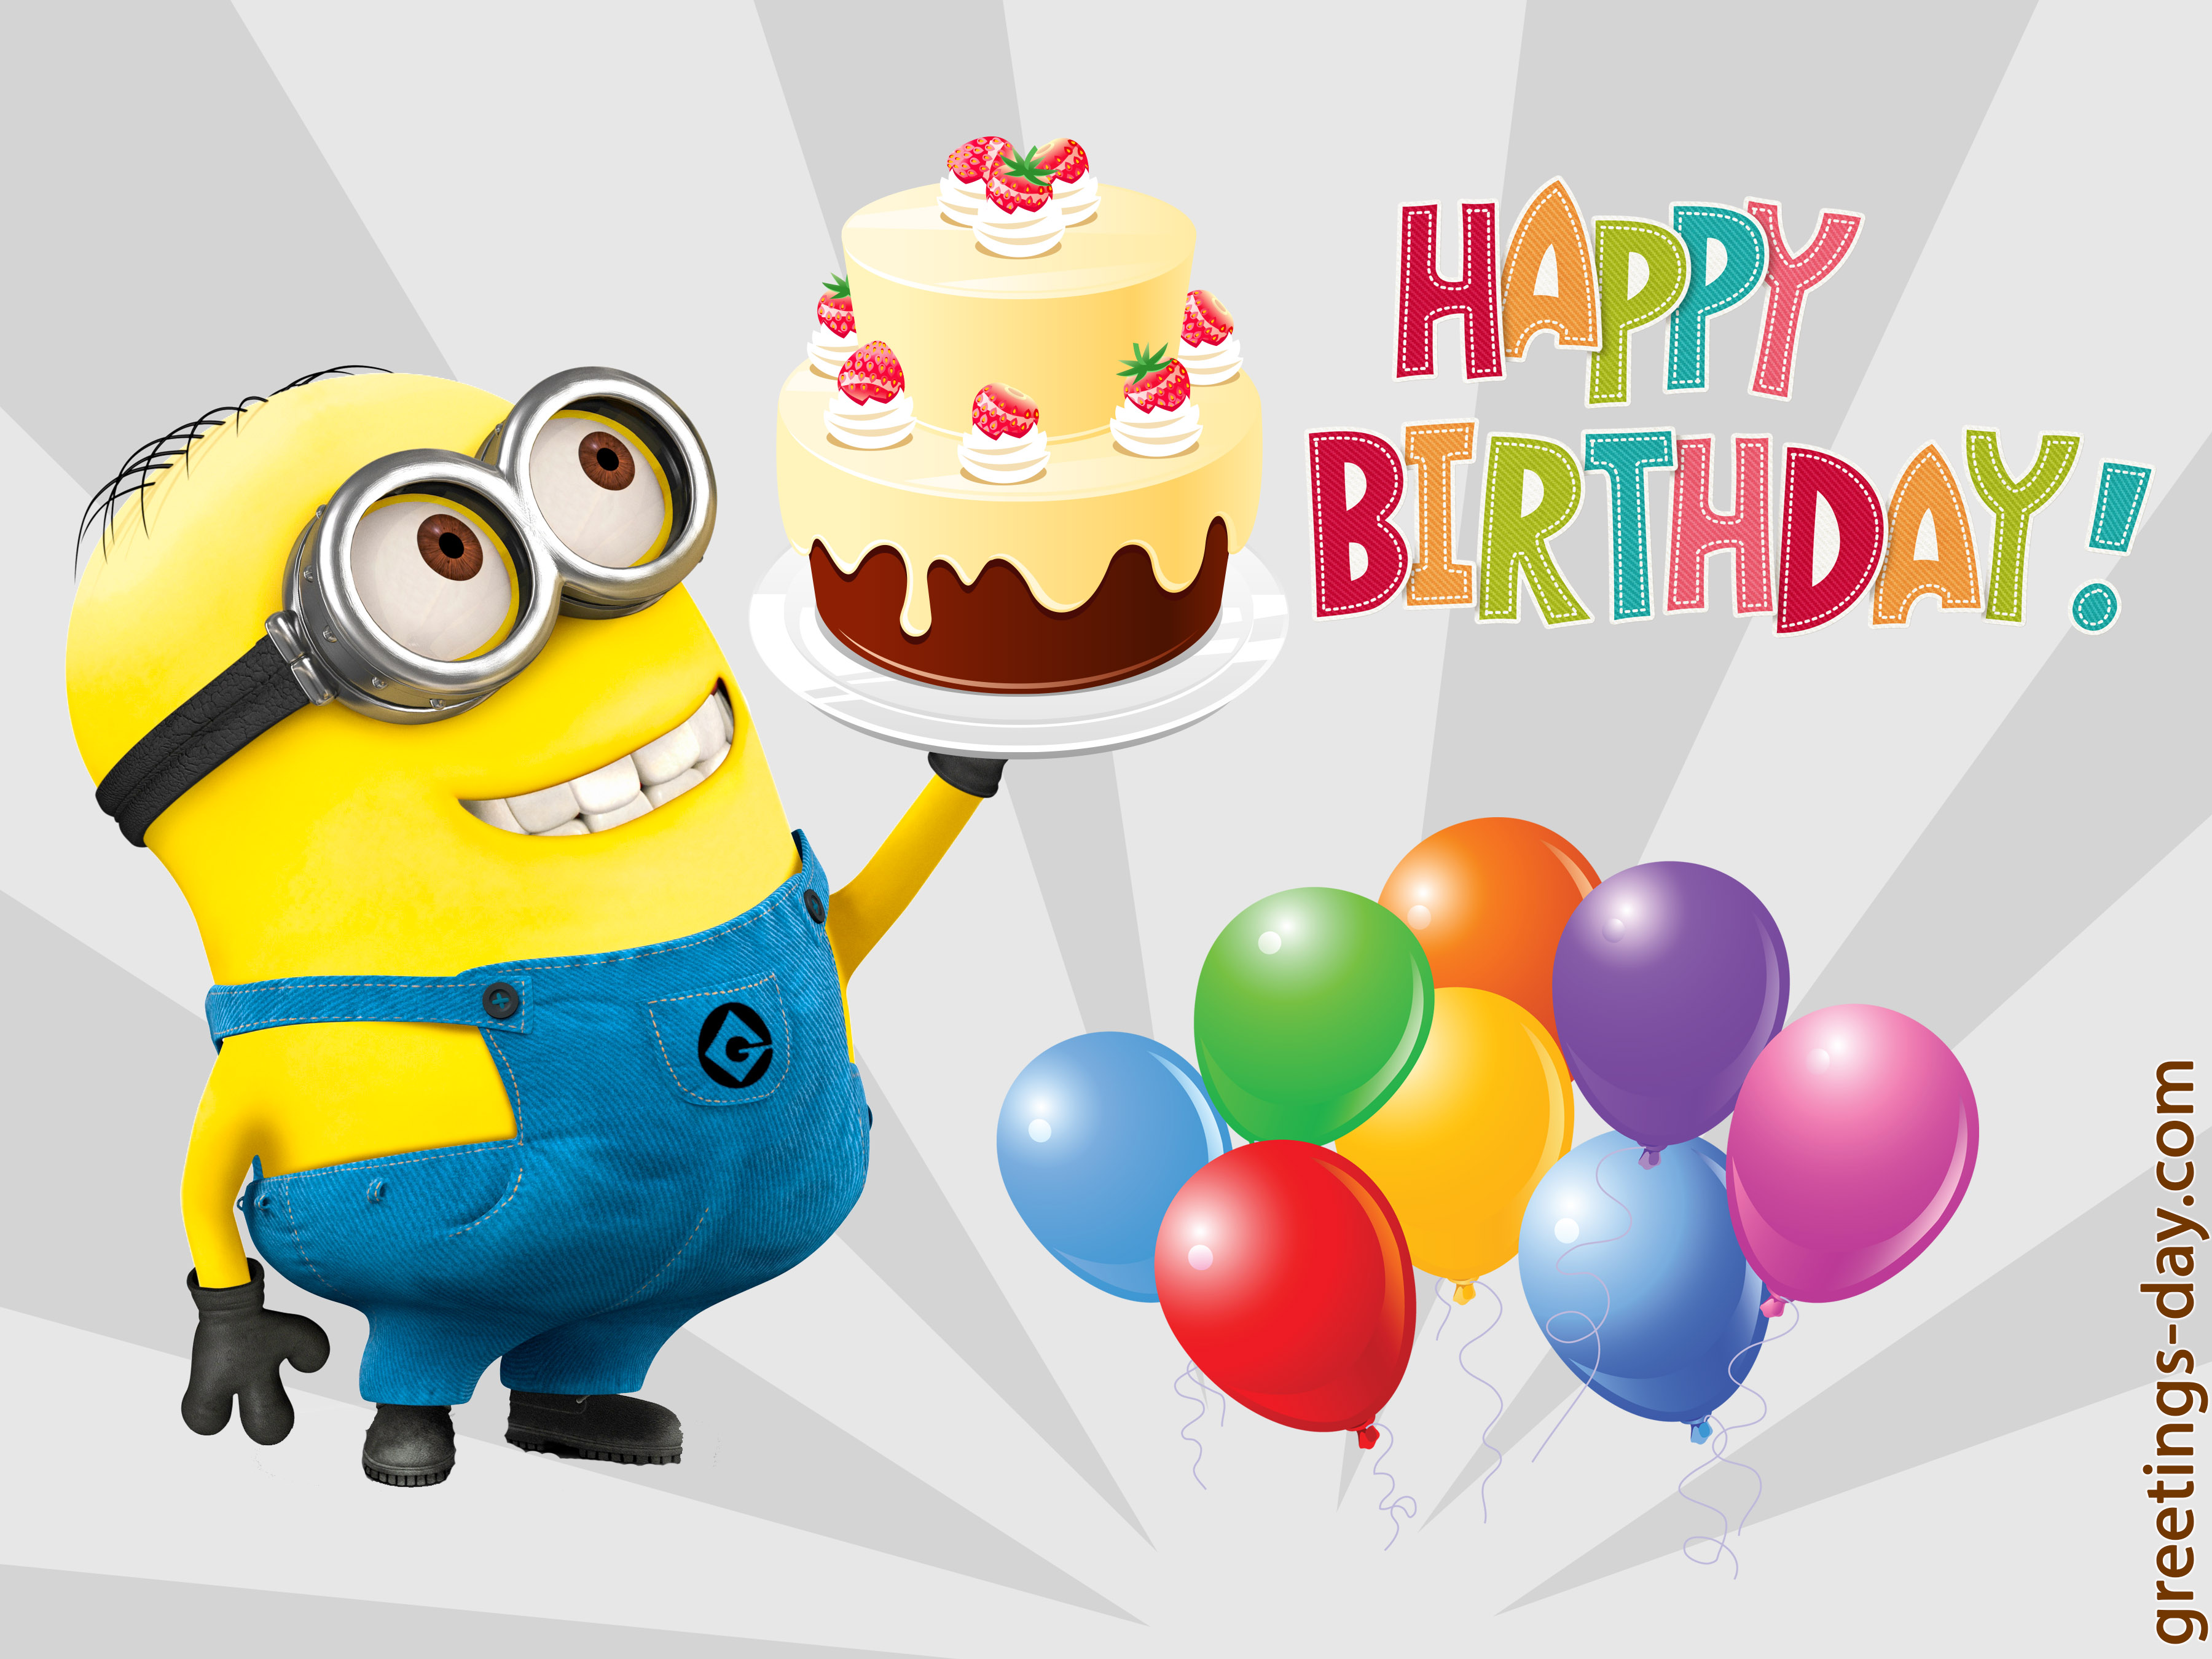 happy birthday Birthday greeting cards pictures animated s jpg